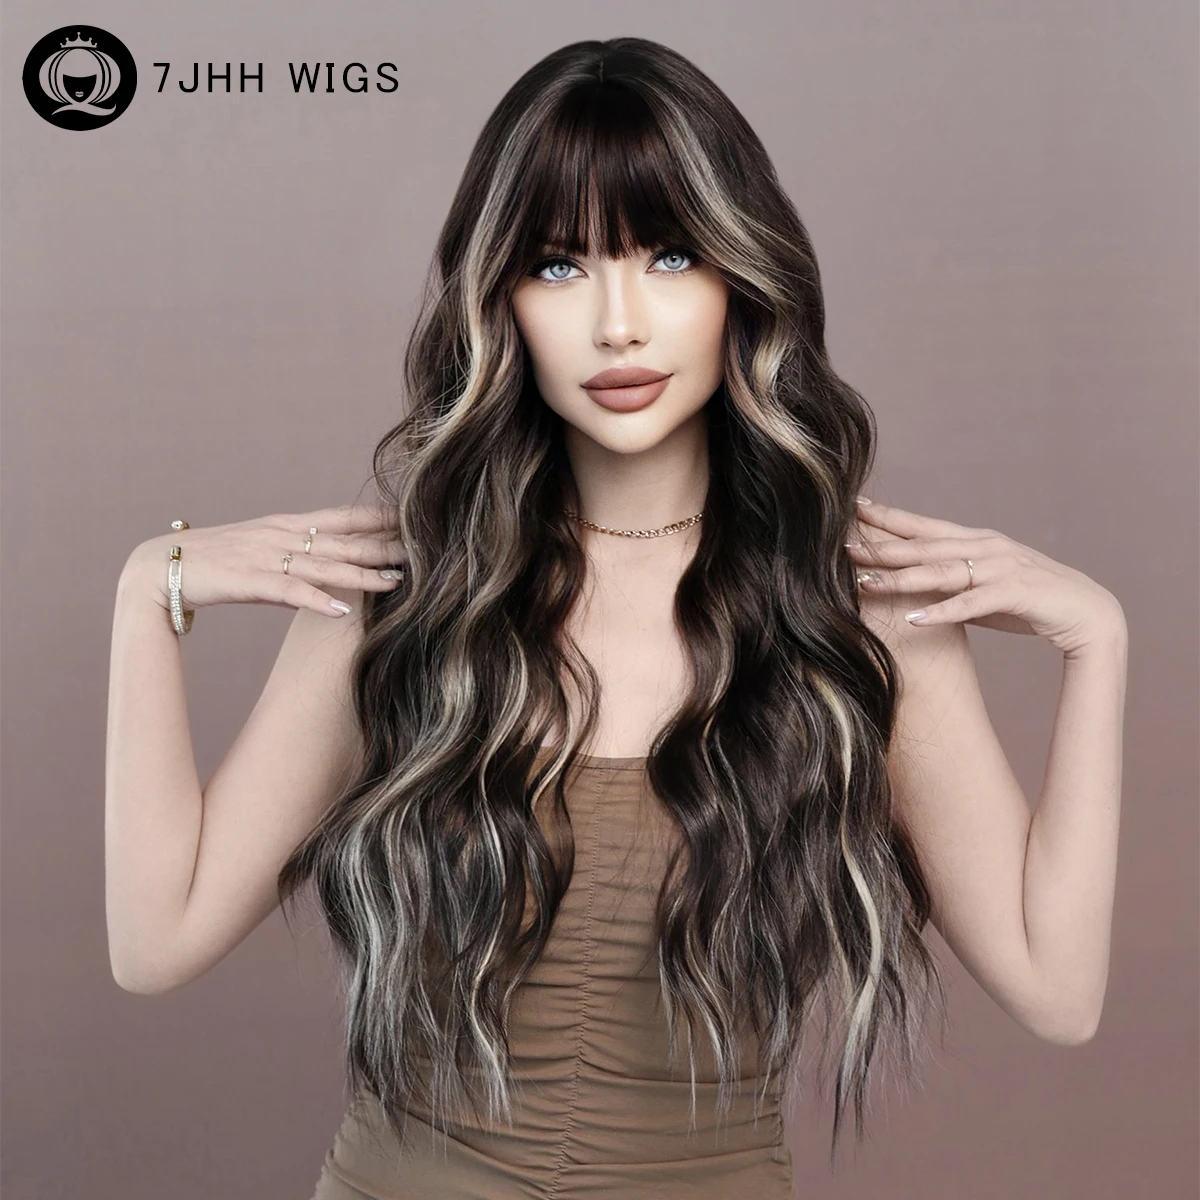 

Synthetic Wavy Black Wig for Women Highlights White Blonde Curly Wig with Bangs High Density Hair Ends Dyed Blonde for Daily